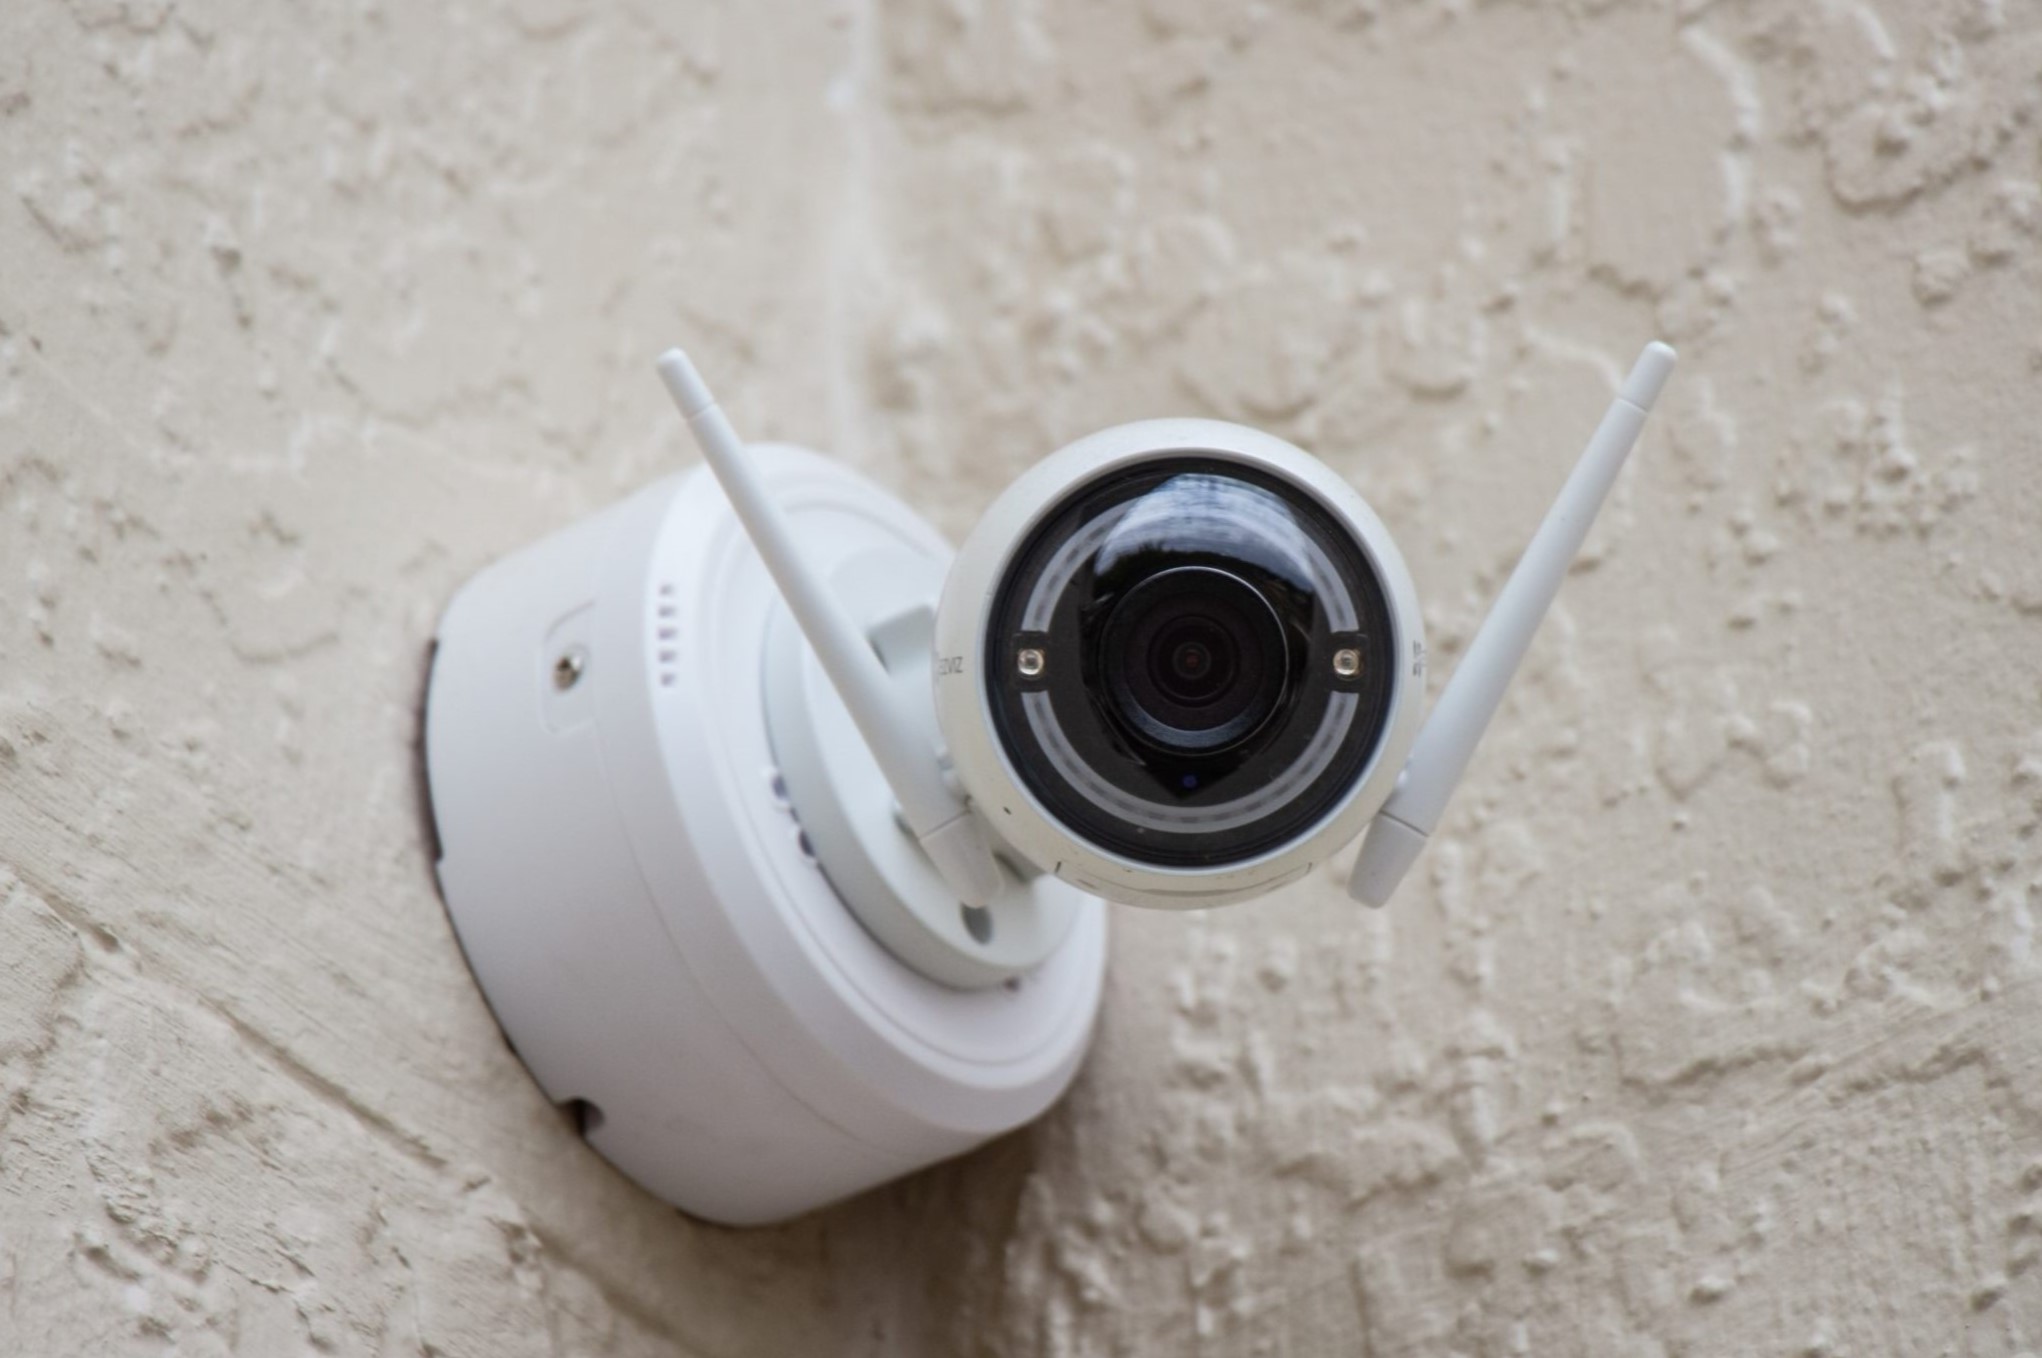 How To Record Using Security Camera